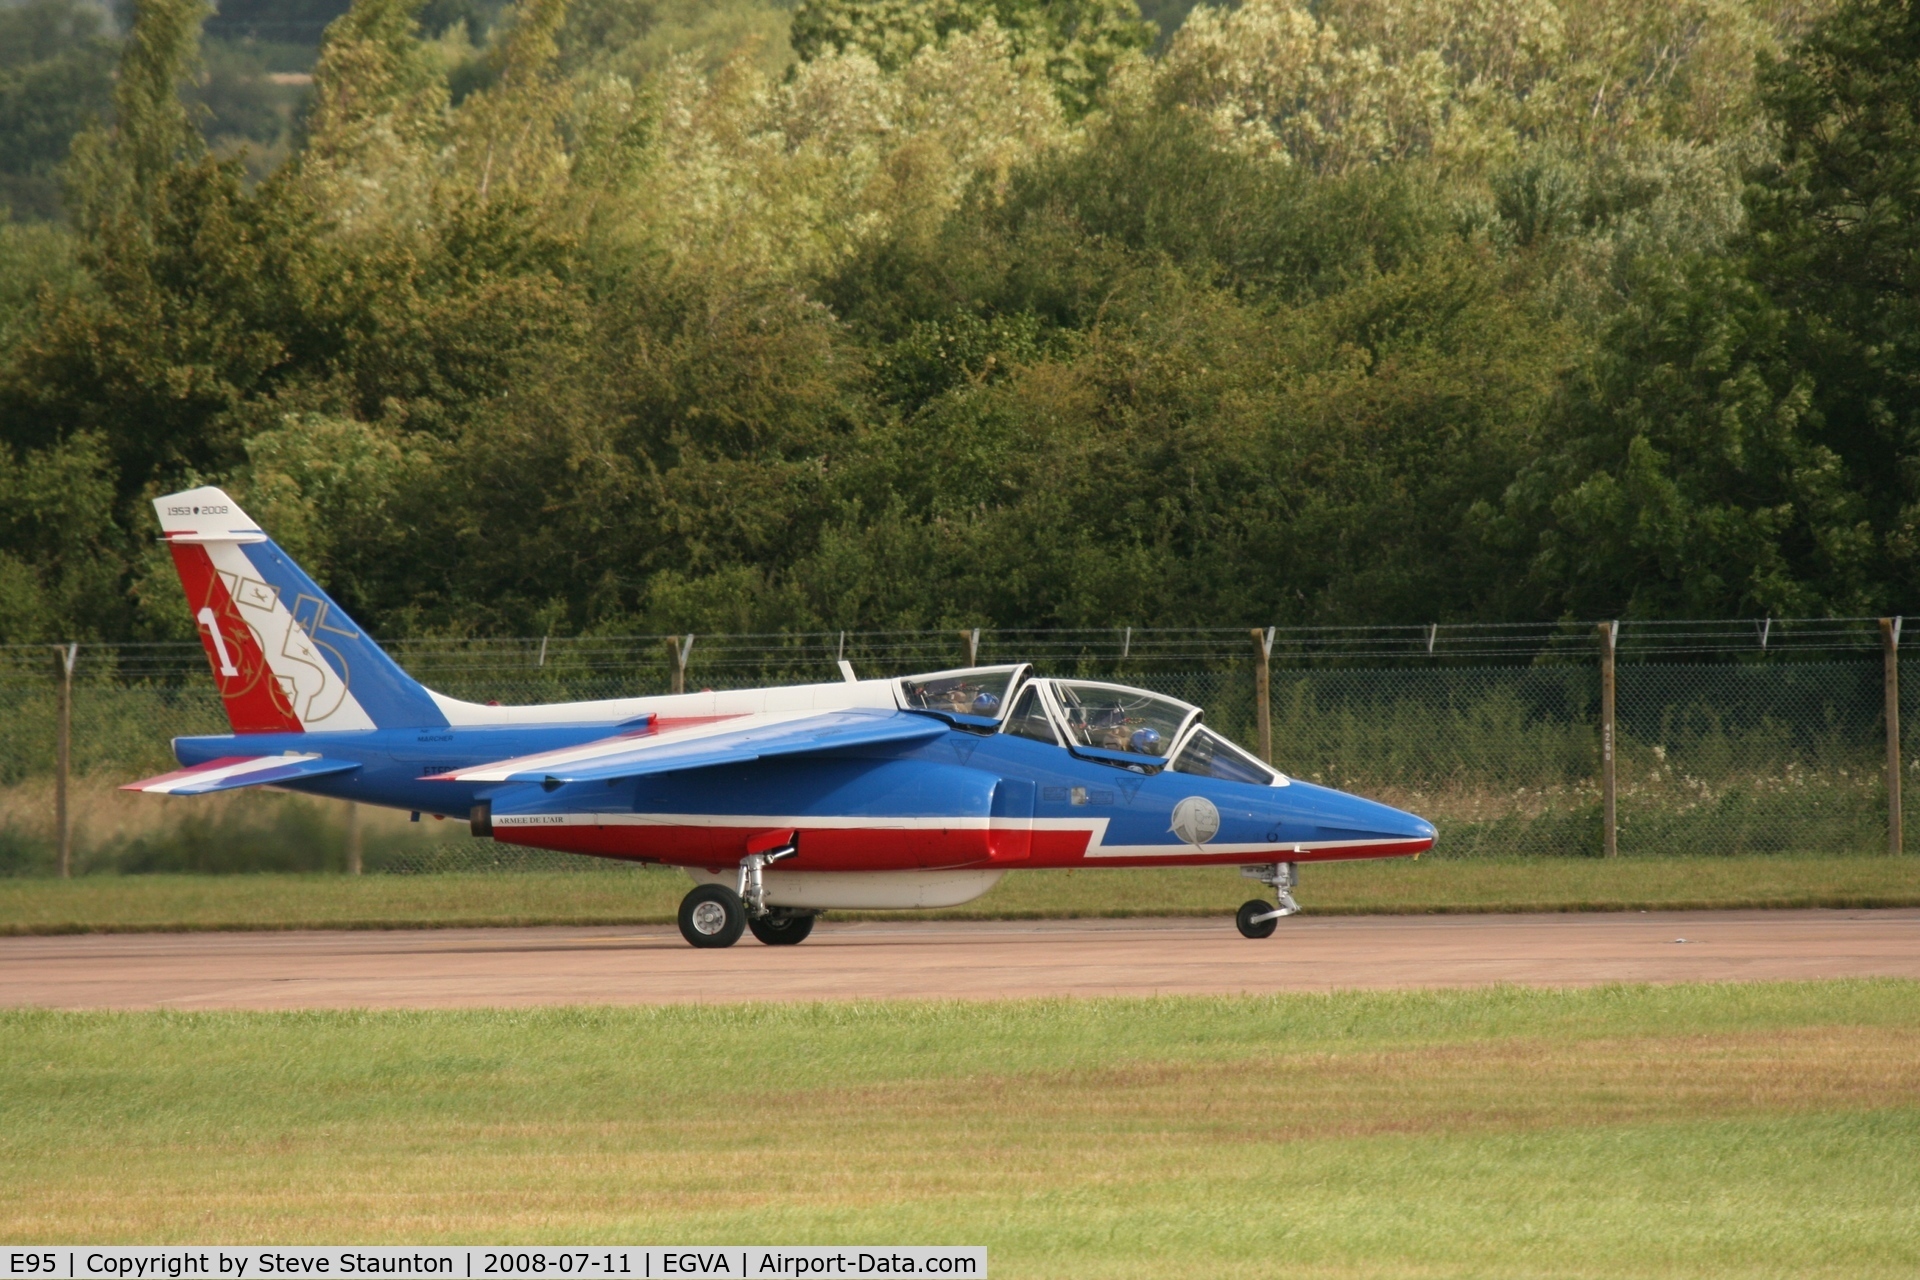 E95, Dassault-Dornier Alpha Jet E C/N E95, Taken at the Royal International Air Tattoo 2008 during arrivals and departures (show days cancelled due to bad weather)